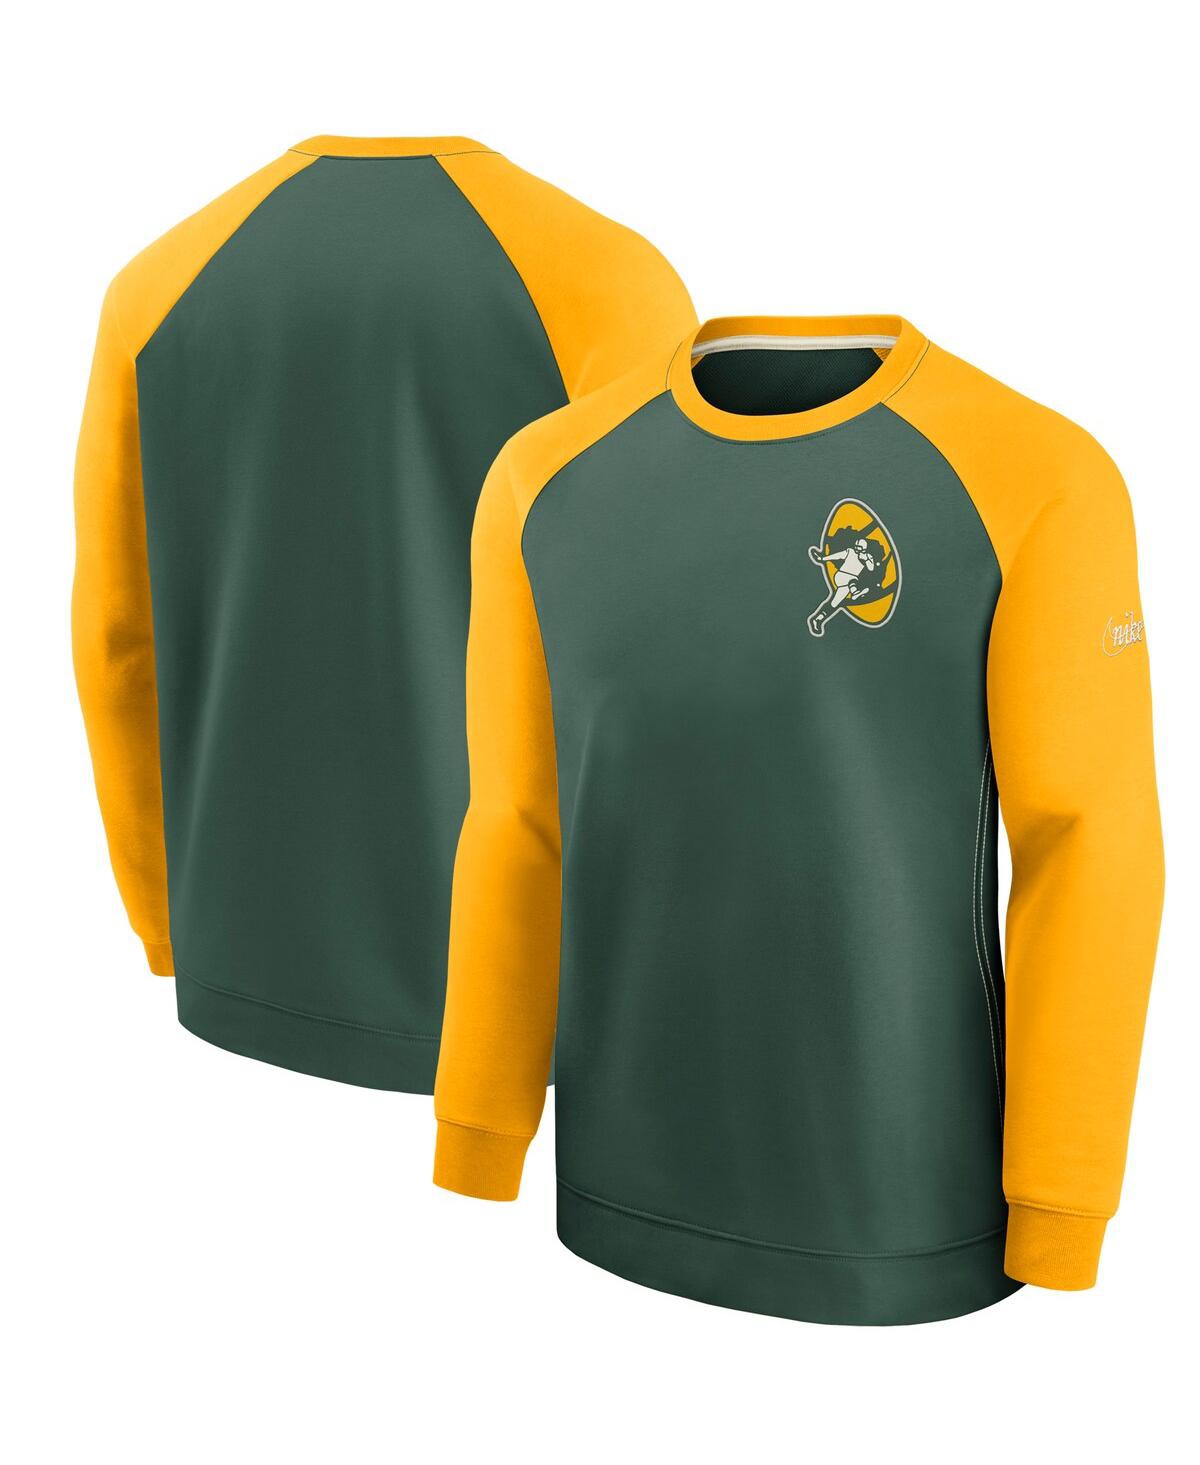 Men's Nike Green and Gold Green Bay Packers Historic Raglan Crew Performance Sweater - Green, Gold